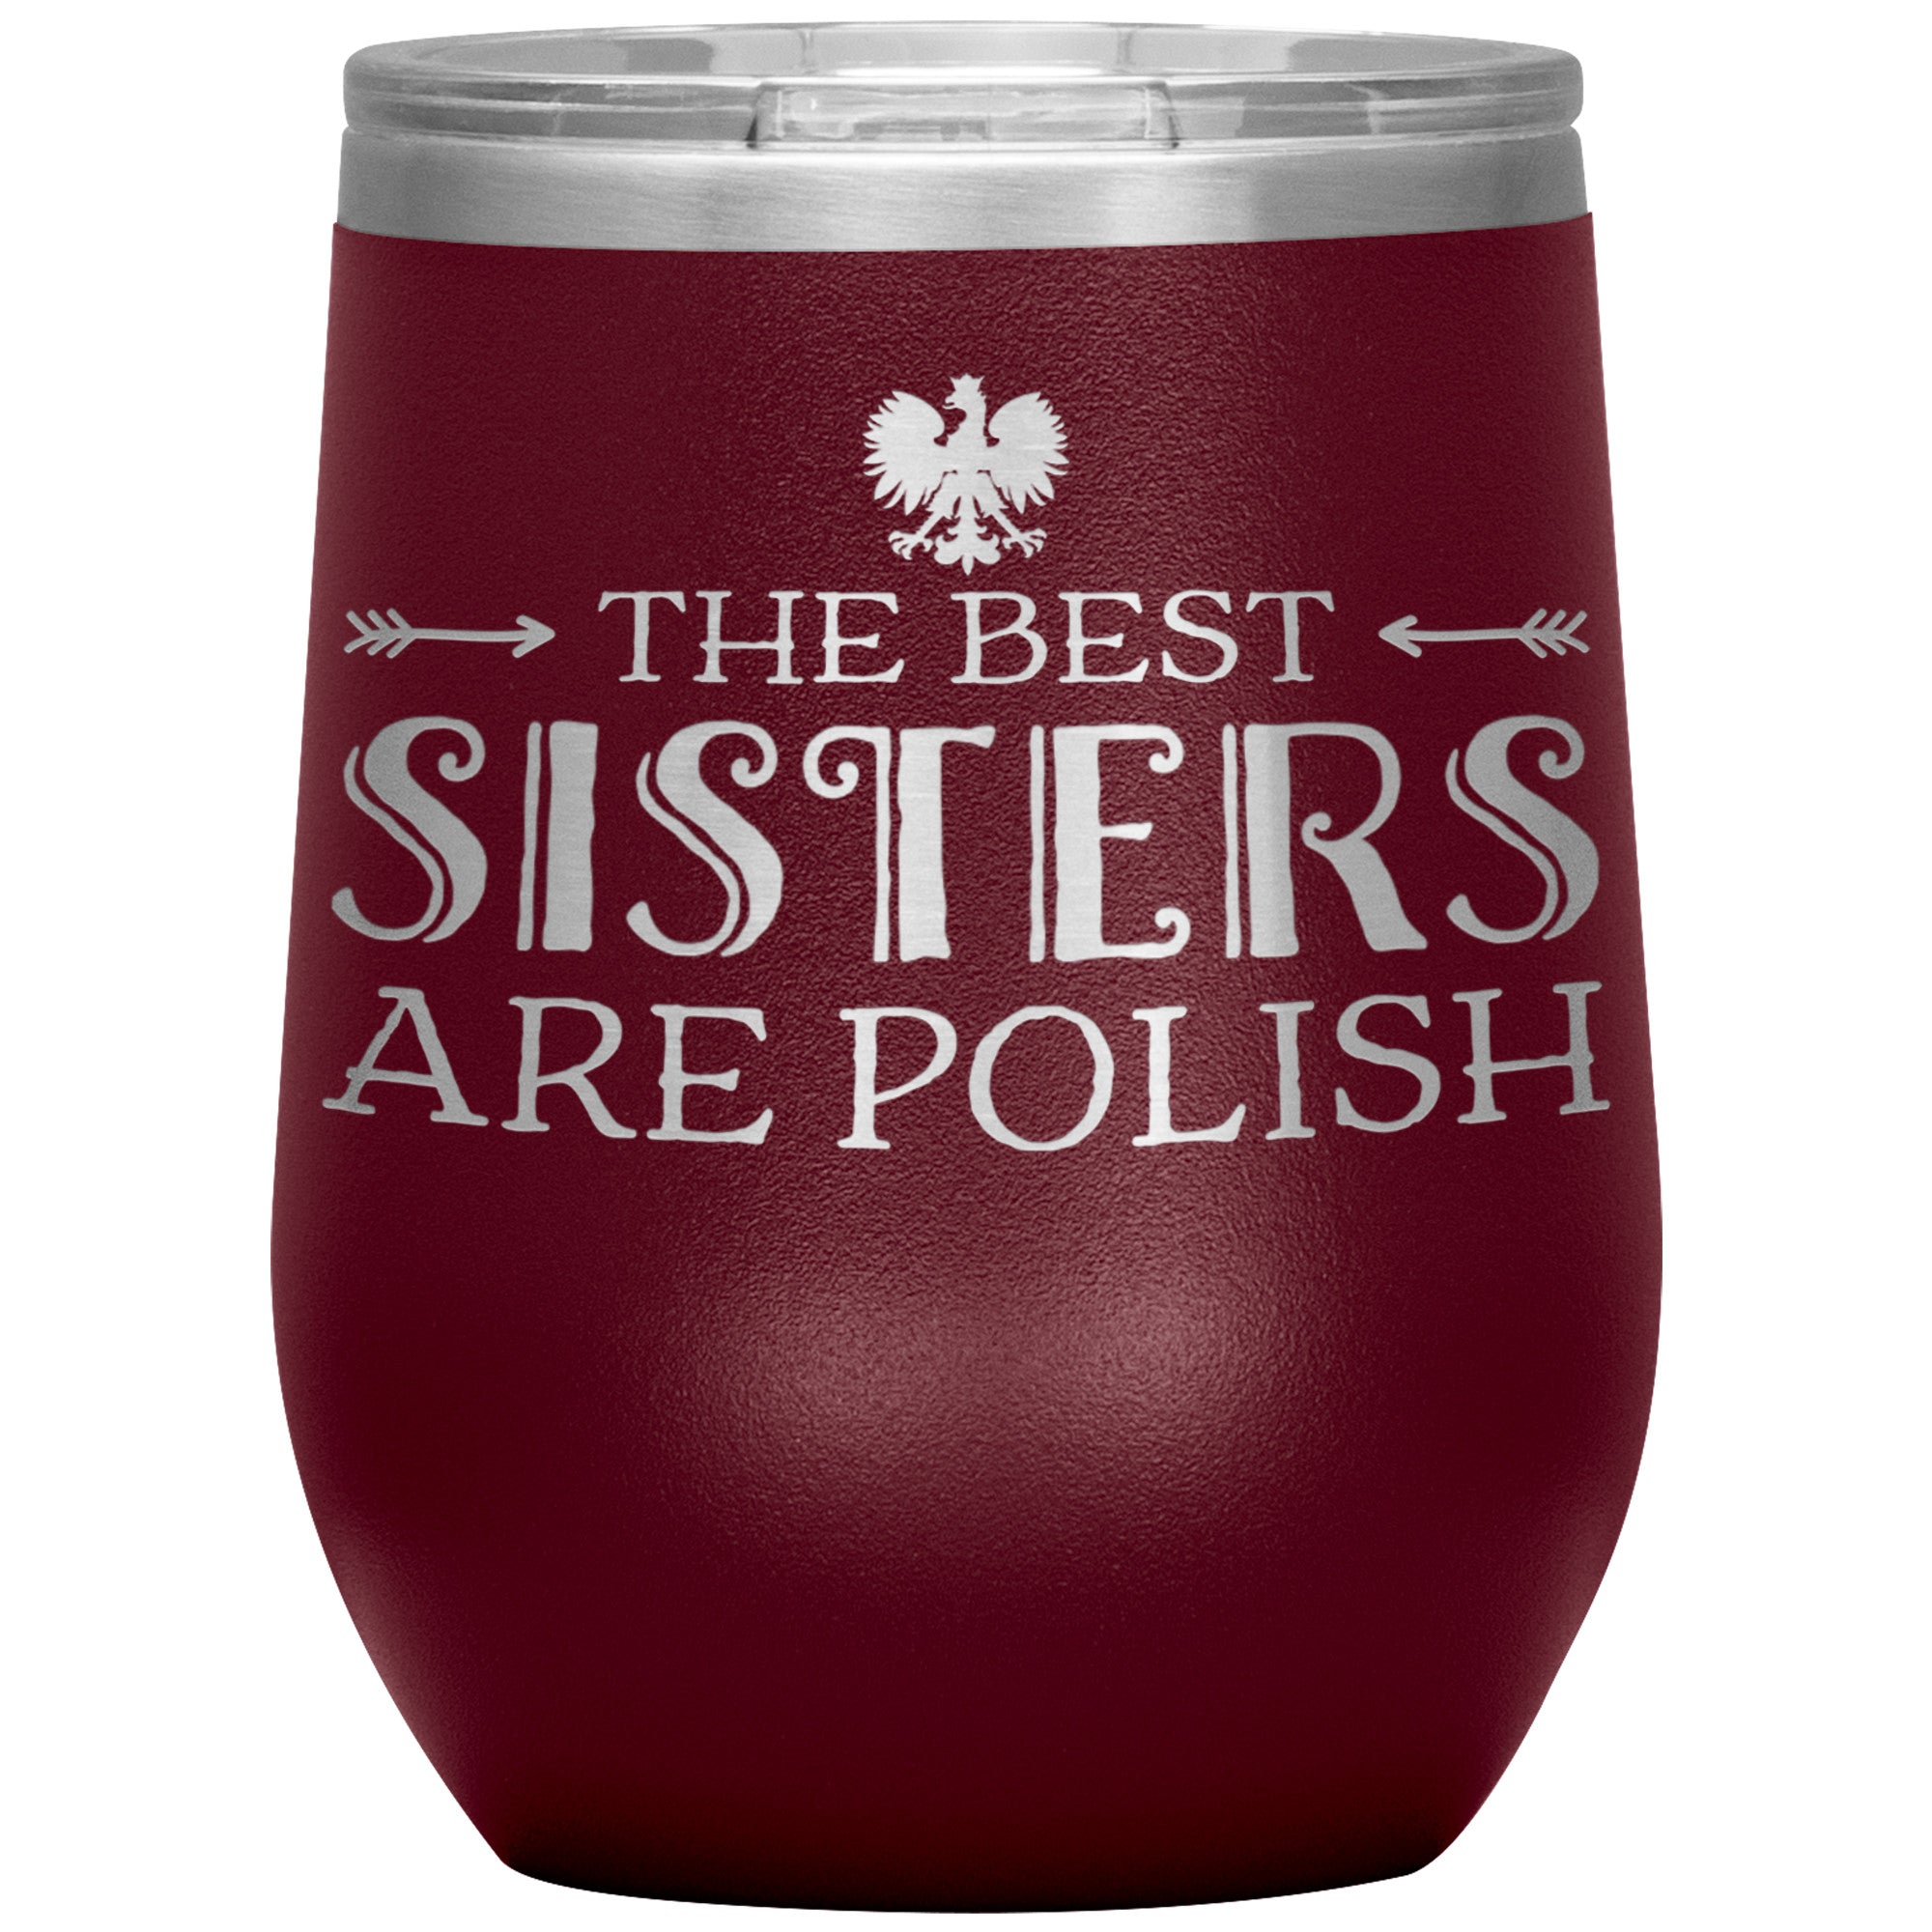 The Best Sisters Are Polish Insulated Wine Tumbler Tumblers teelaunch Maroon  